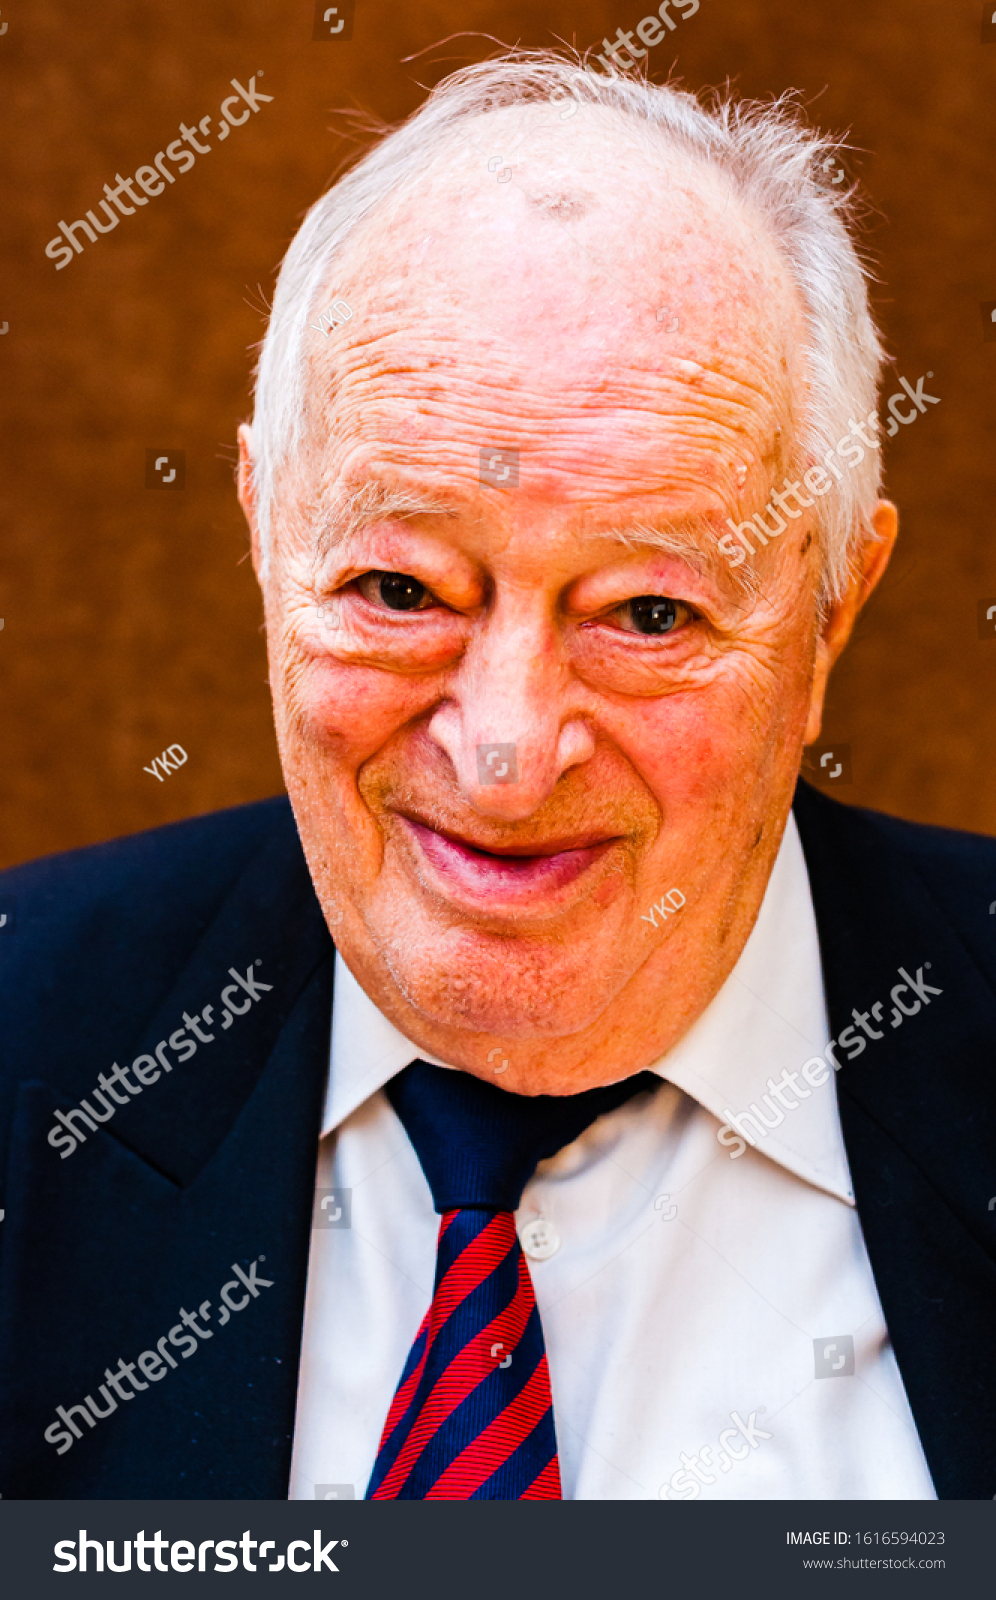 Portrait of happy white elderly man with dark suit, white shirt and striped blue red tie smiling on bright brown background #1616594023